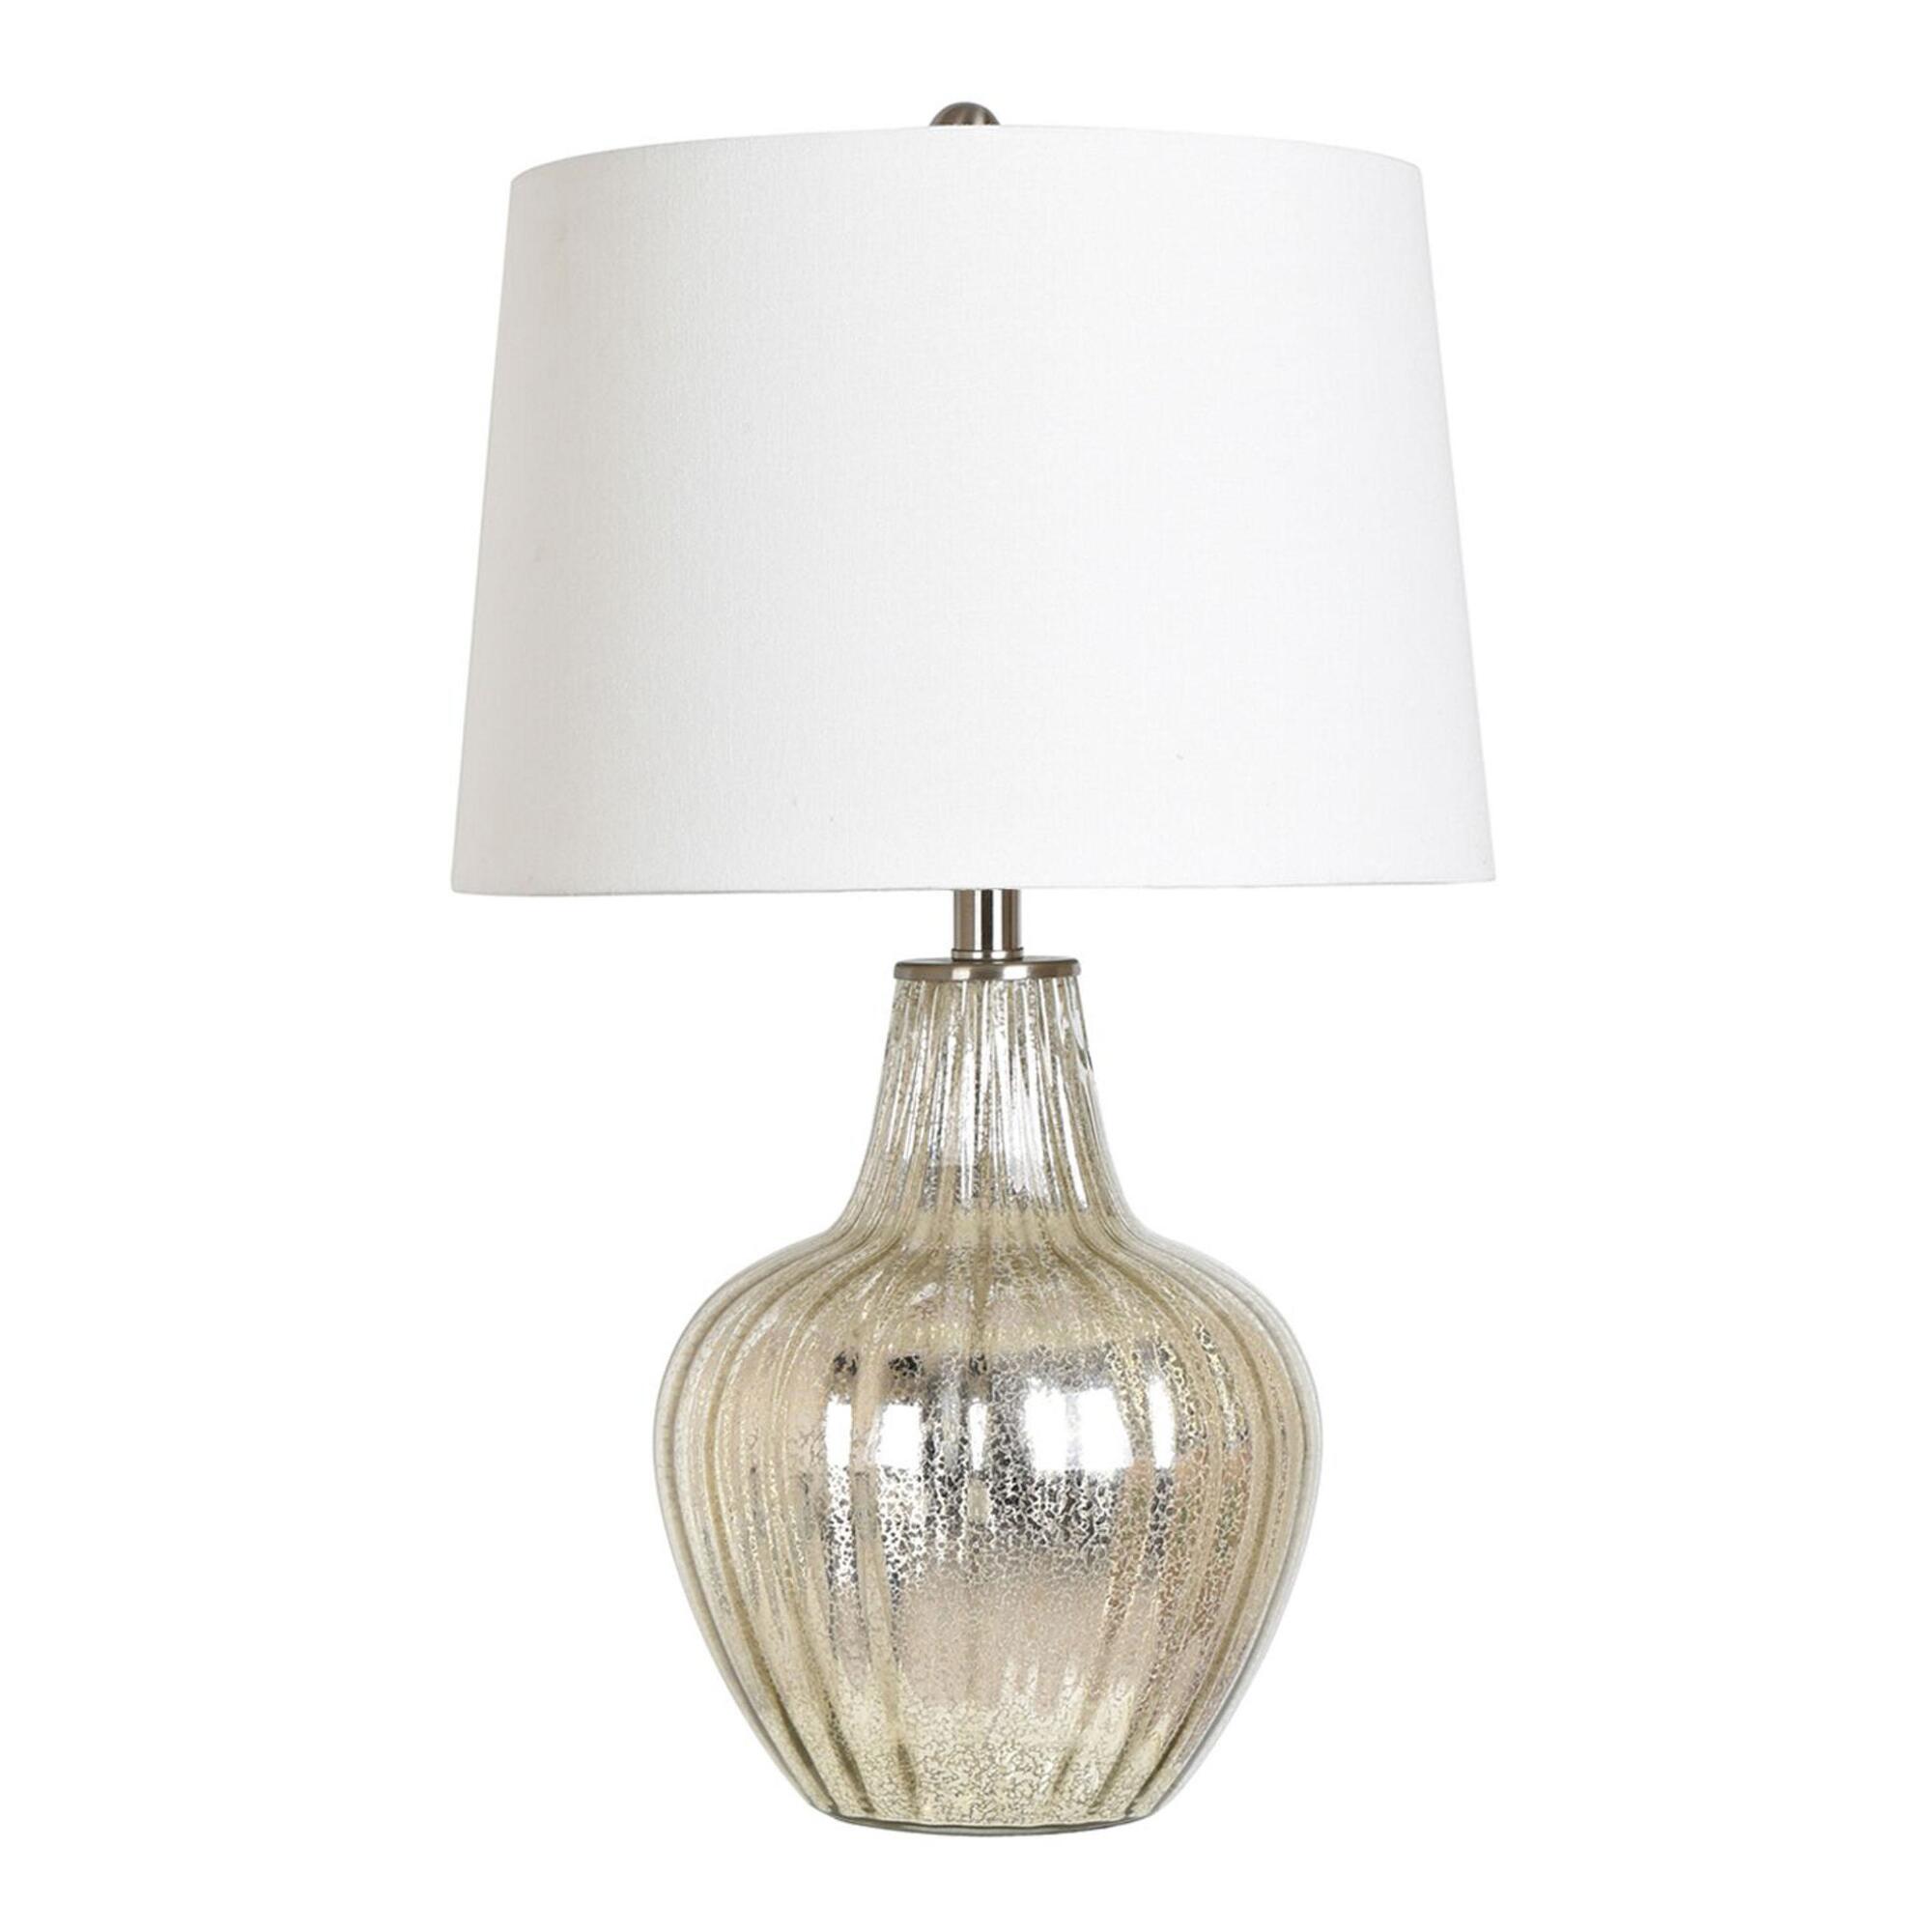 Gold Mercury Glass Ribbed Table Lamp: Metallic by World Market